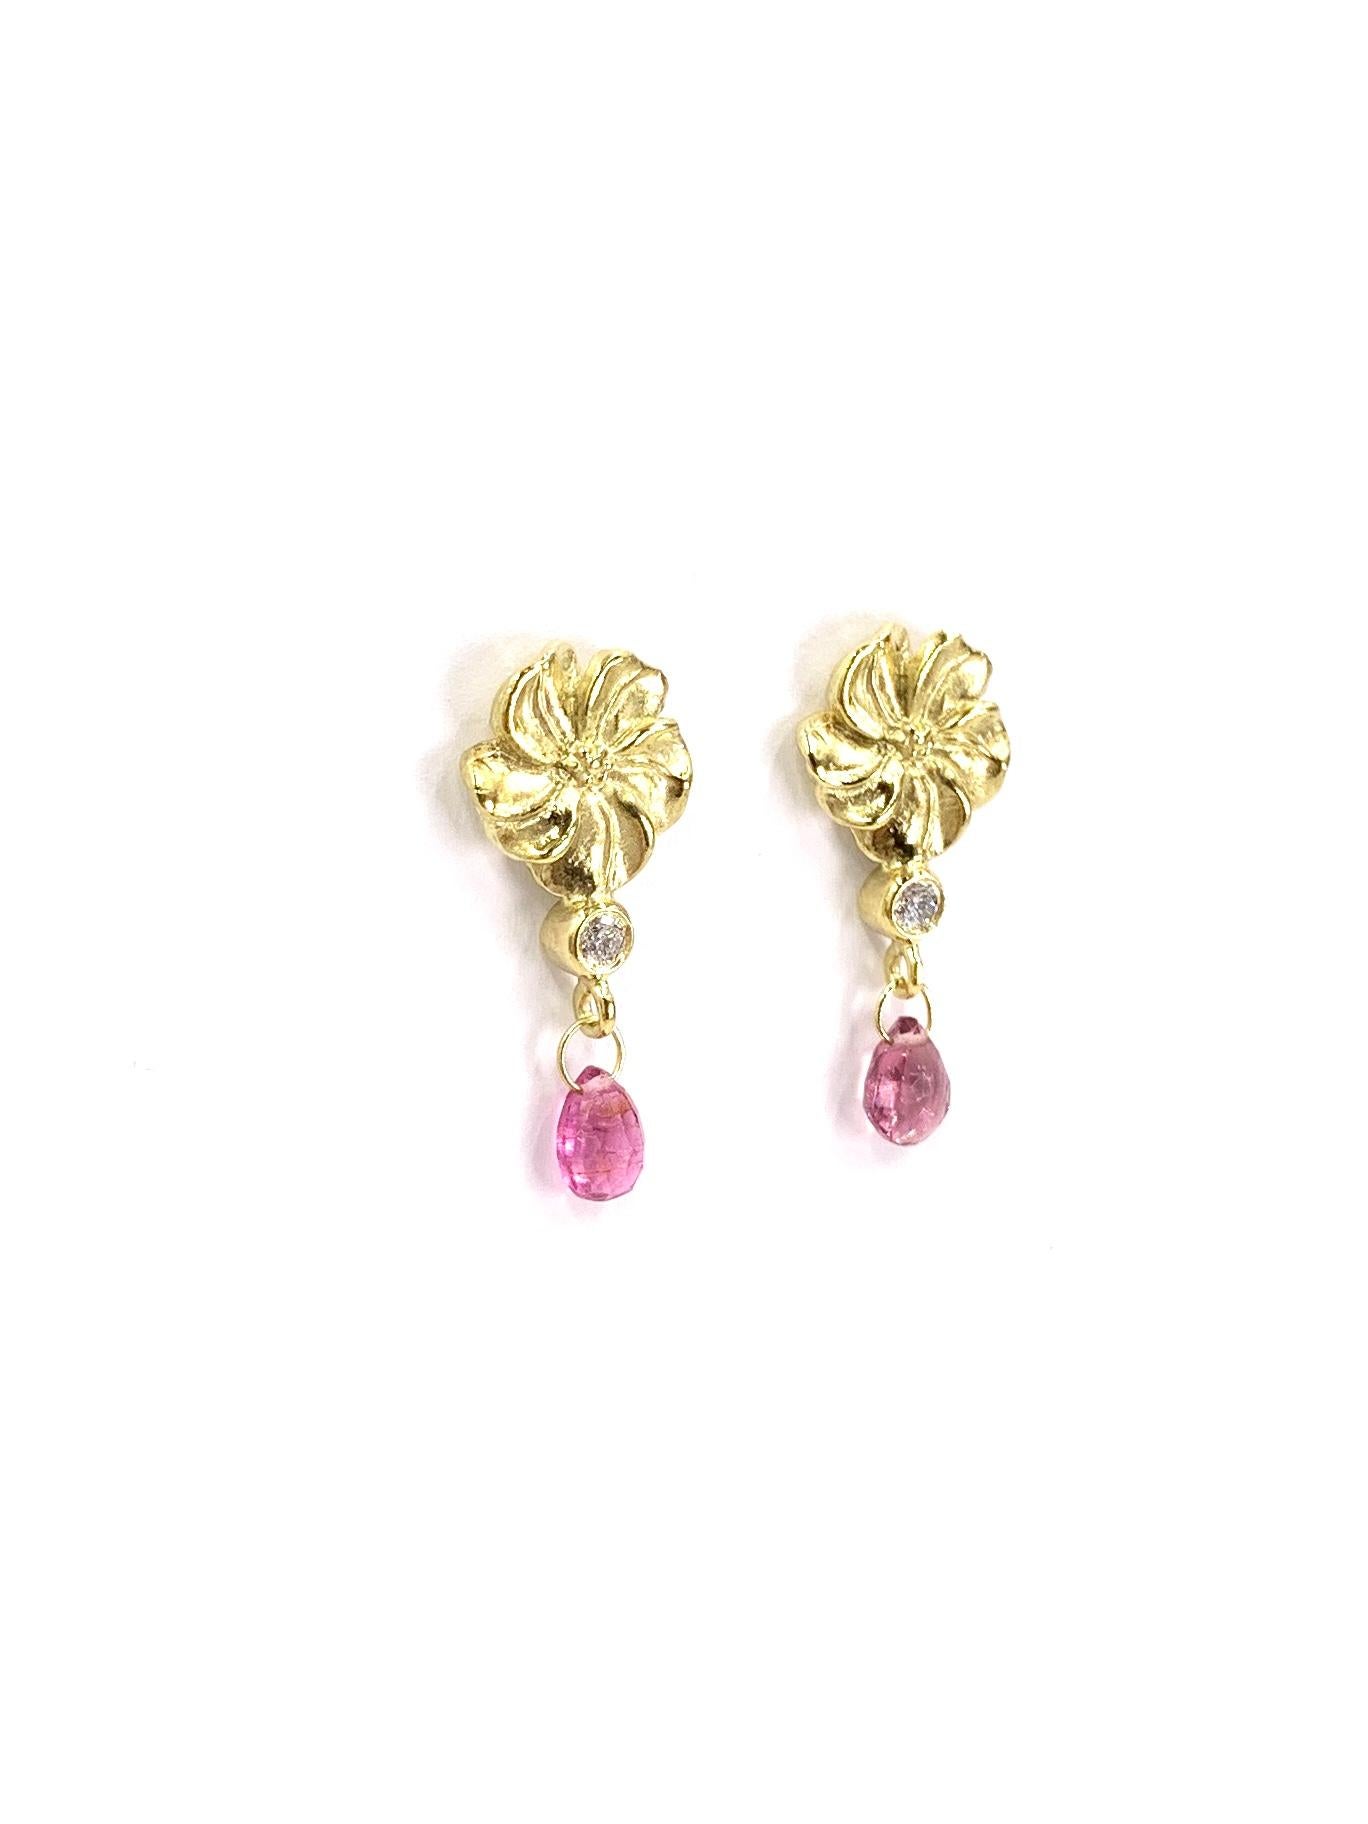 Well crafted by expert goldsmith jeweler, SeidenGang. These 18 karat yellow gold playful, every day drop earrings feature carved flowers with a single bezel set round brilliant white diamond hanging above a briolette cut pink tourmaline. Diamond